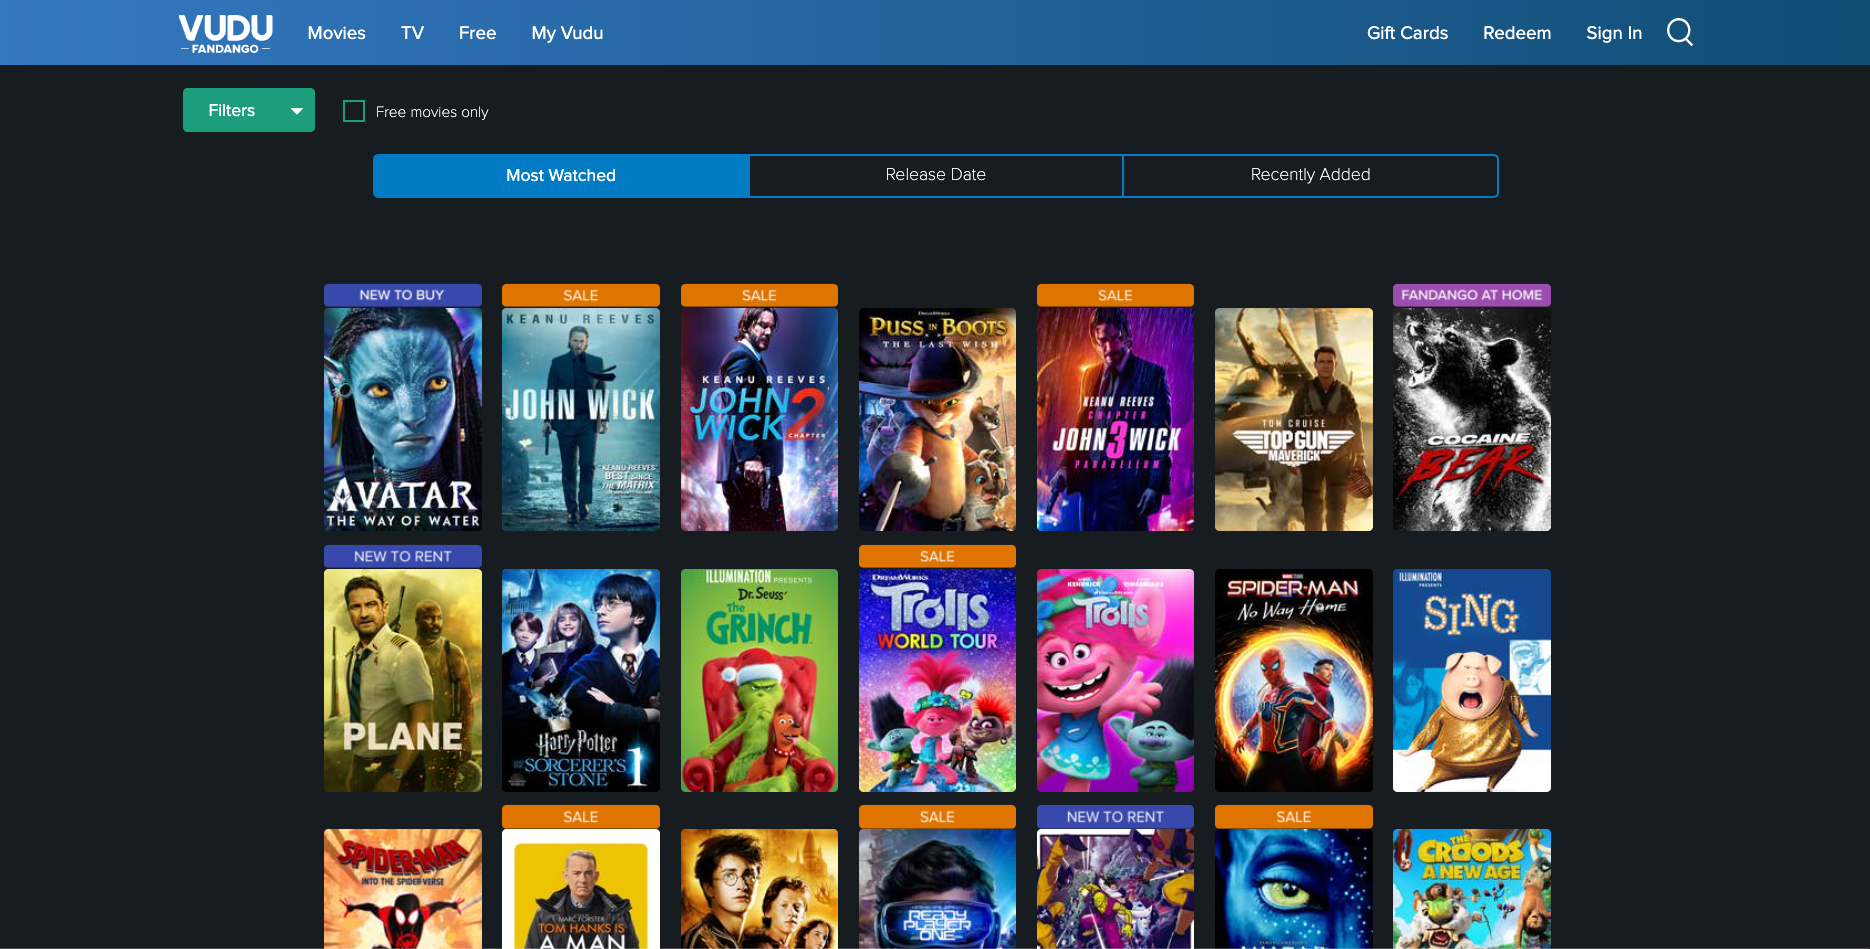 Remote.tools shares a list of websites to watch free movies. Vudu is a digital media service that provides access to movies and TV shows. It was acquired by Fandango in 2020, and is available on a variety of devices, including computers, smartphones, and smart TVs.